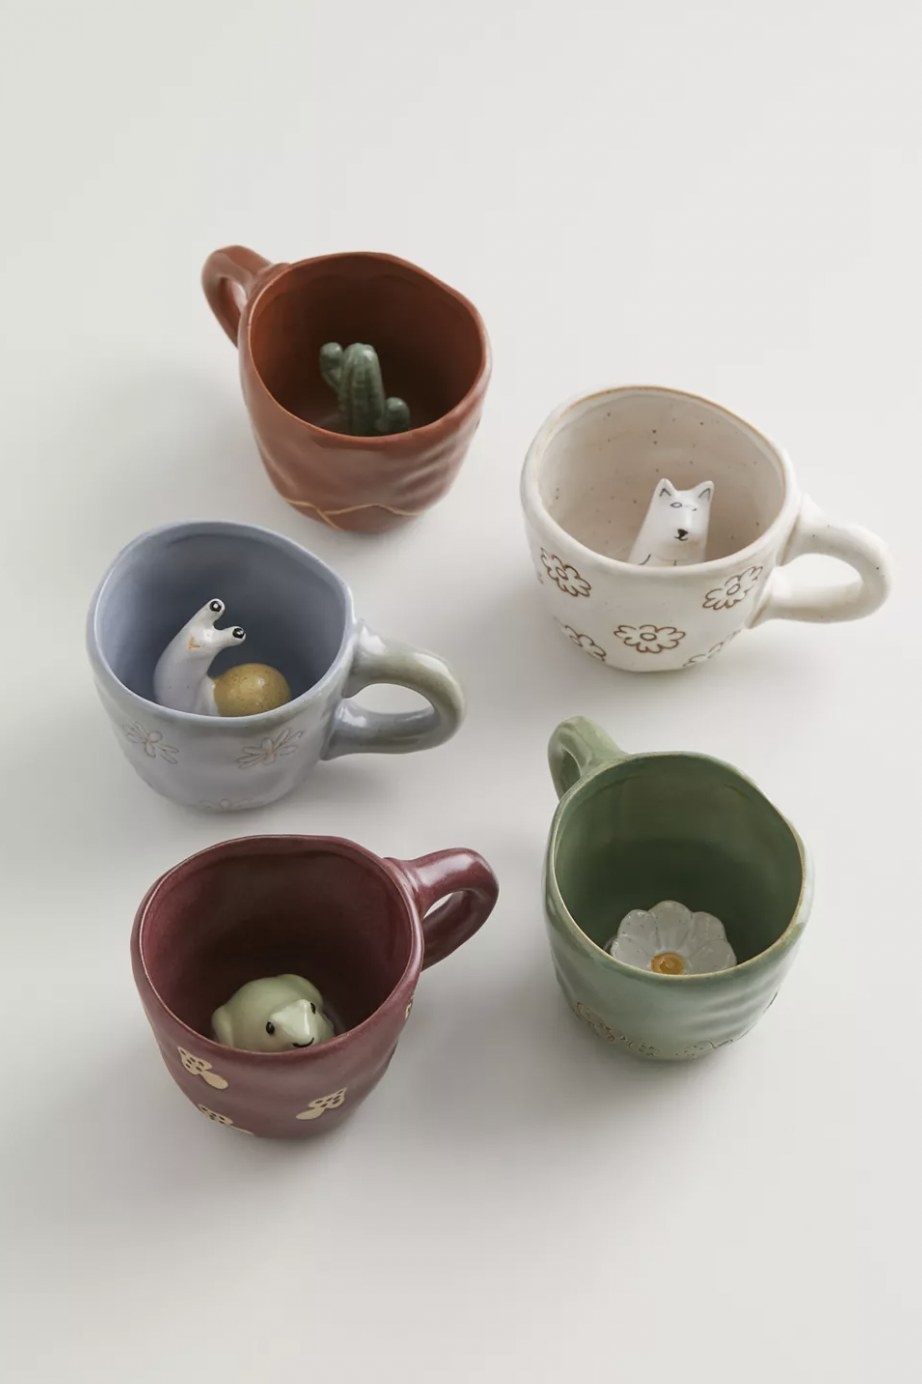 The various mugs with different ceramic animals and plants hiding at the bottom